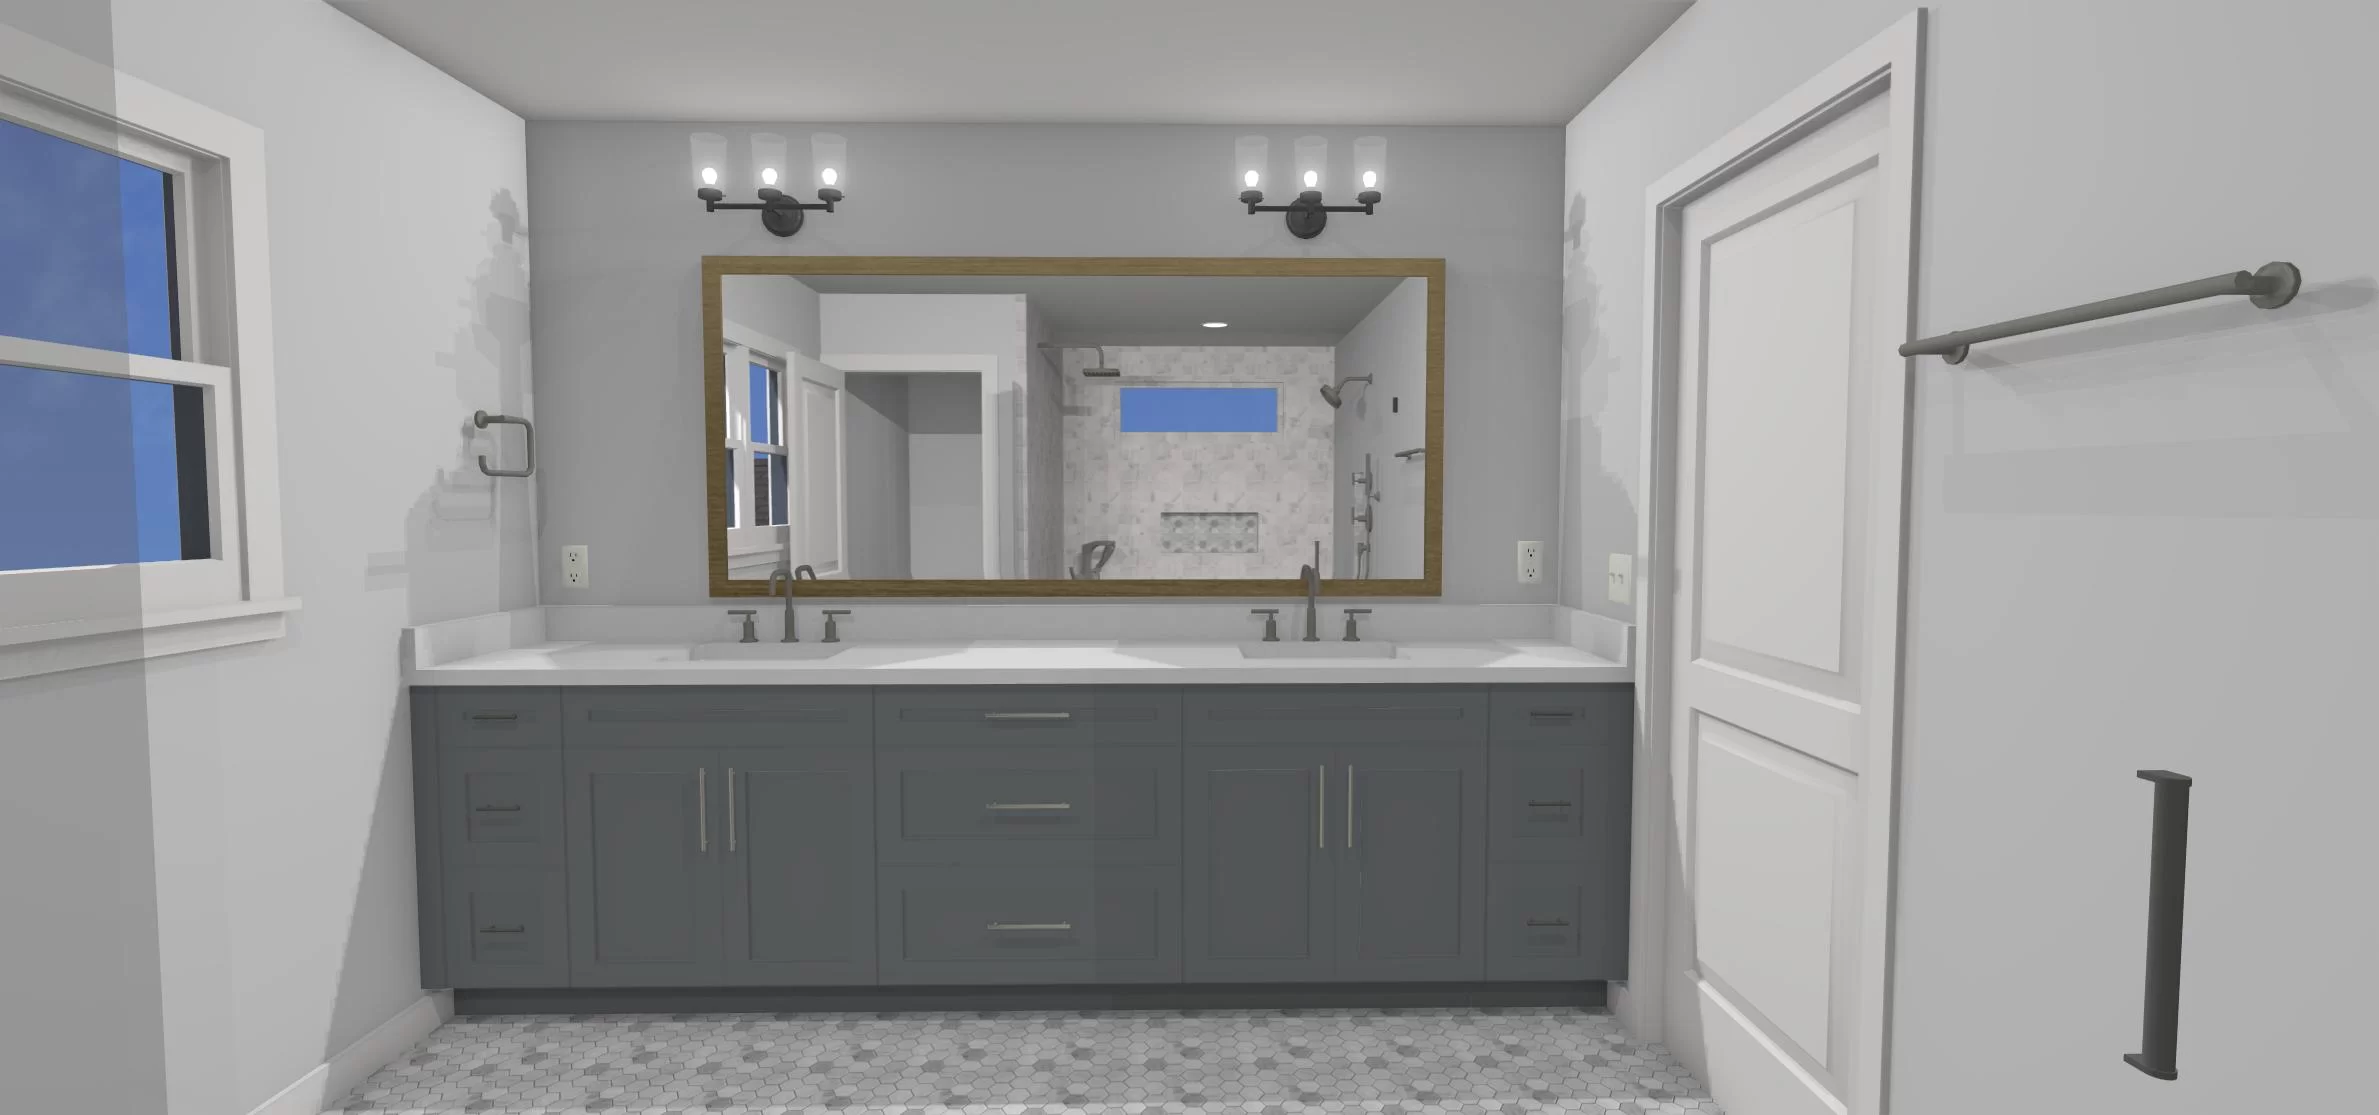 Large double vanity in gray finish